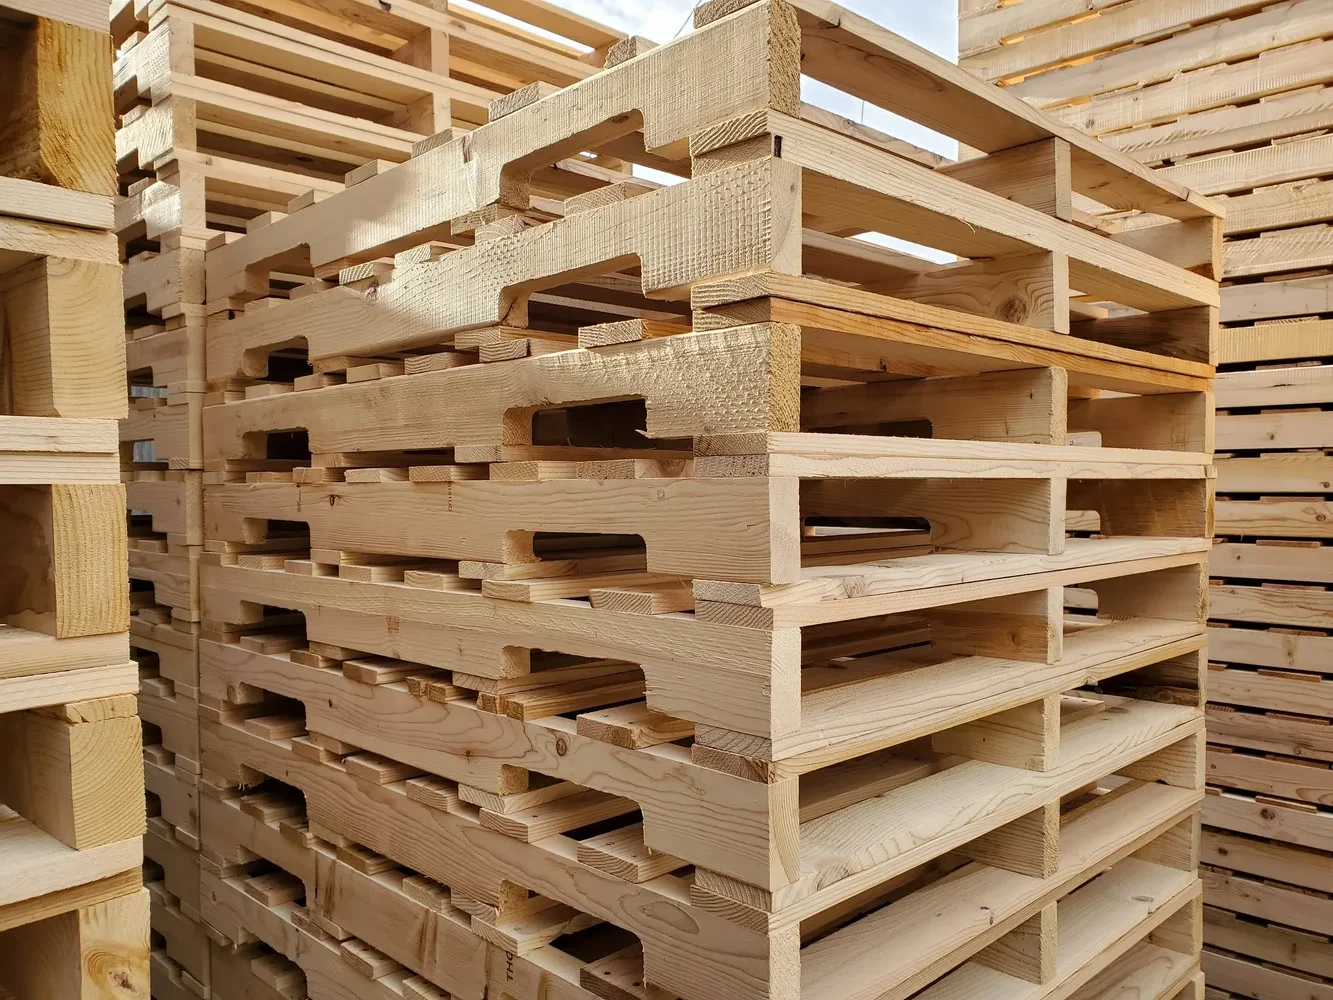 Wooden Pallet Cost The Global Consequences